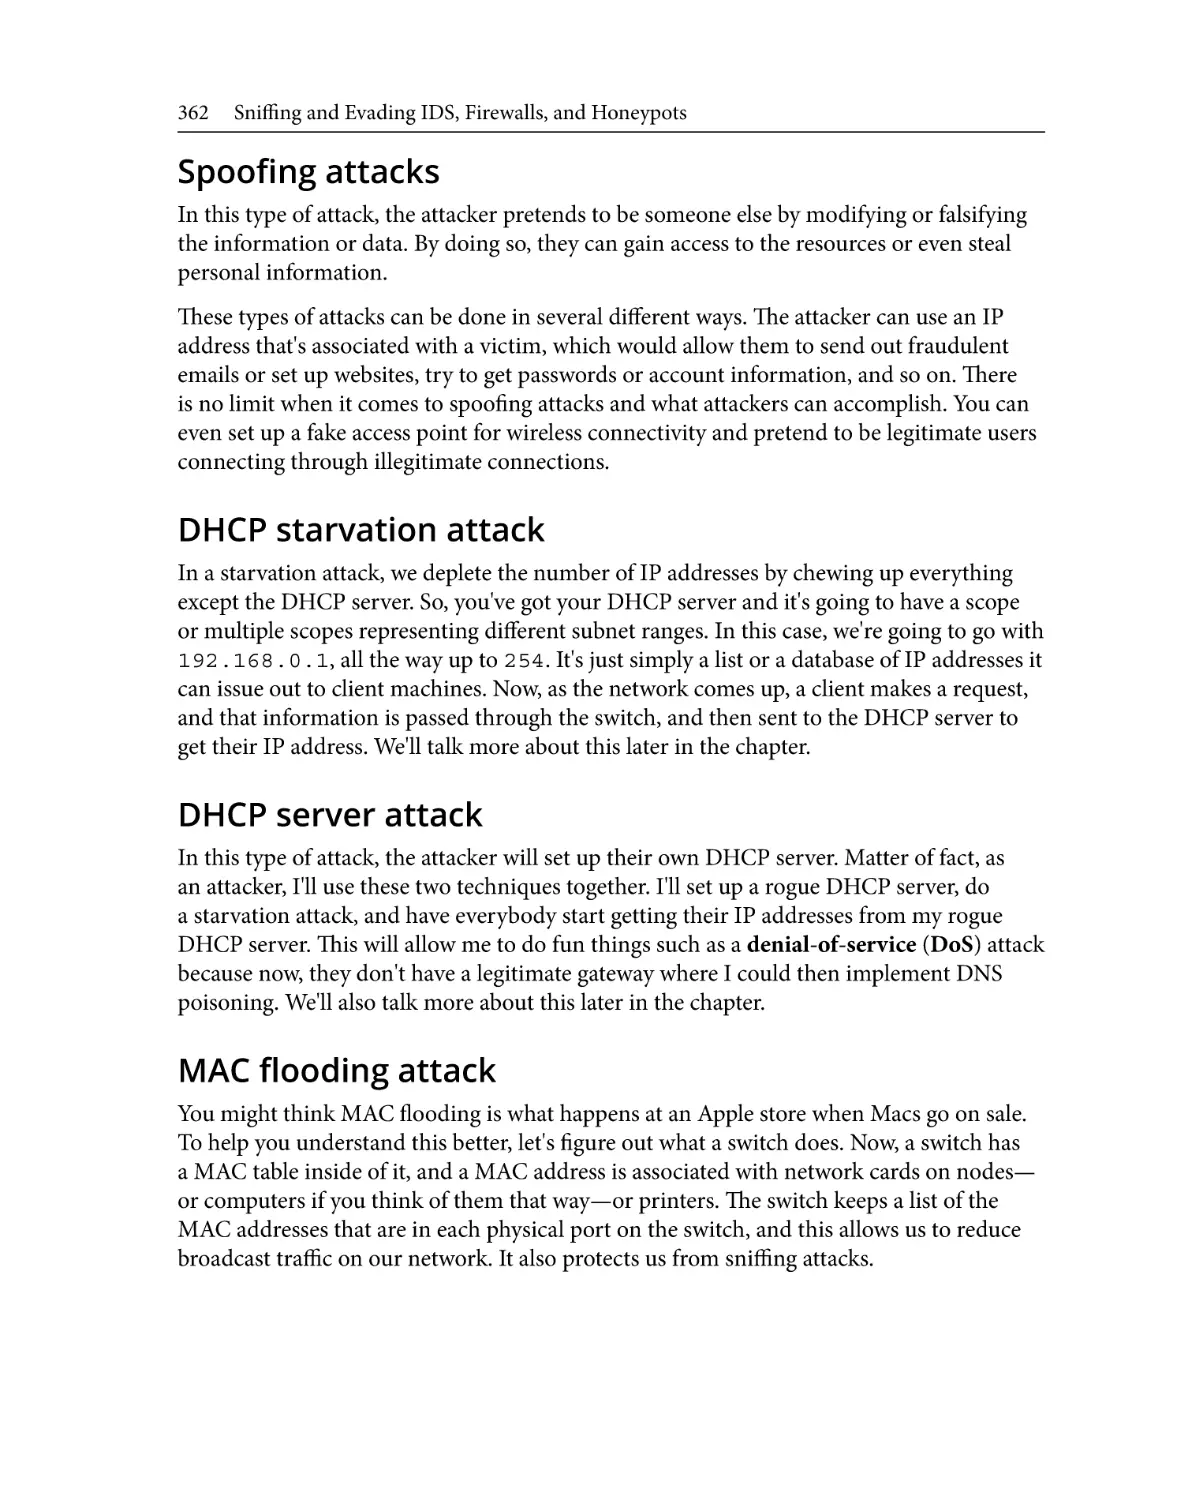 Spoofing attacks
DHCP starvation attack
DHCP server attack
MAC flooding attack